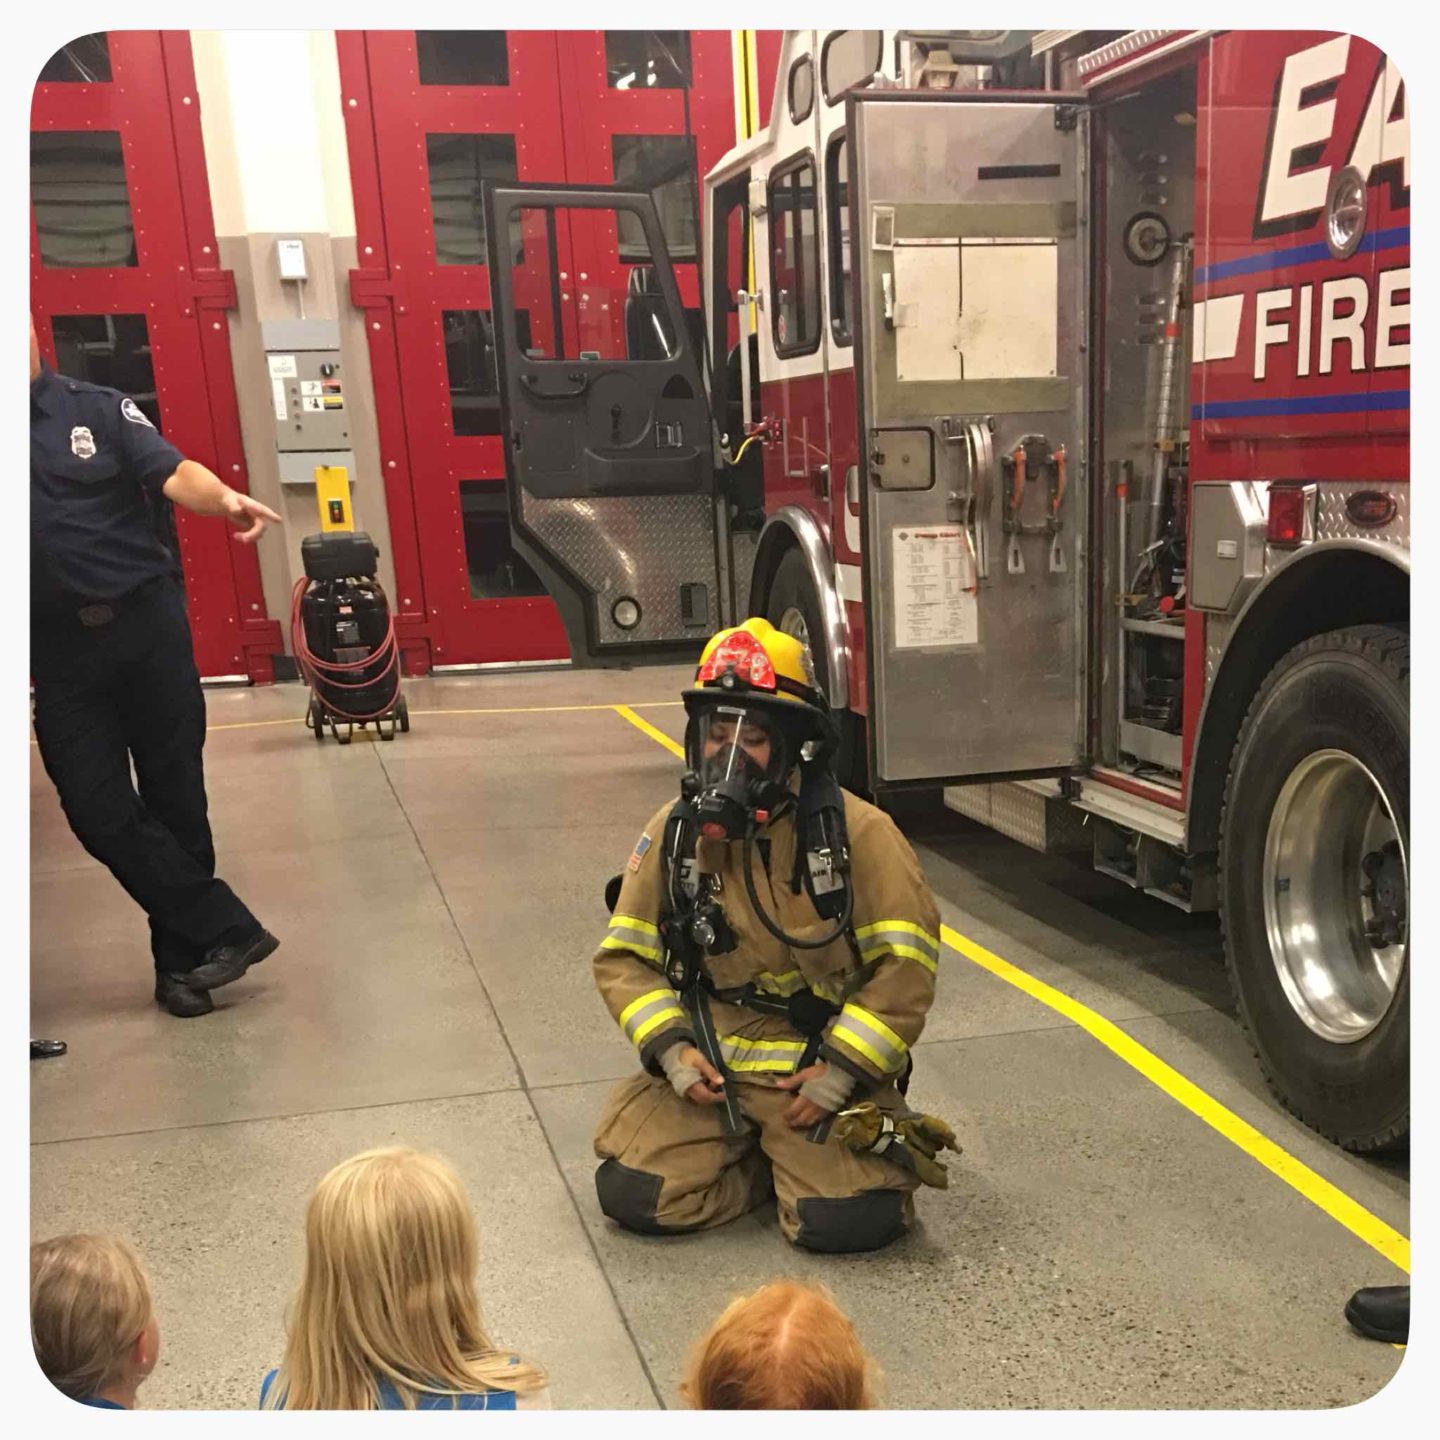 Fire Safety Week: learning about fire fighters and fire safety. Here's a simple DIY box fire truck the children can create to play with.